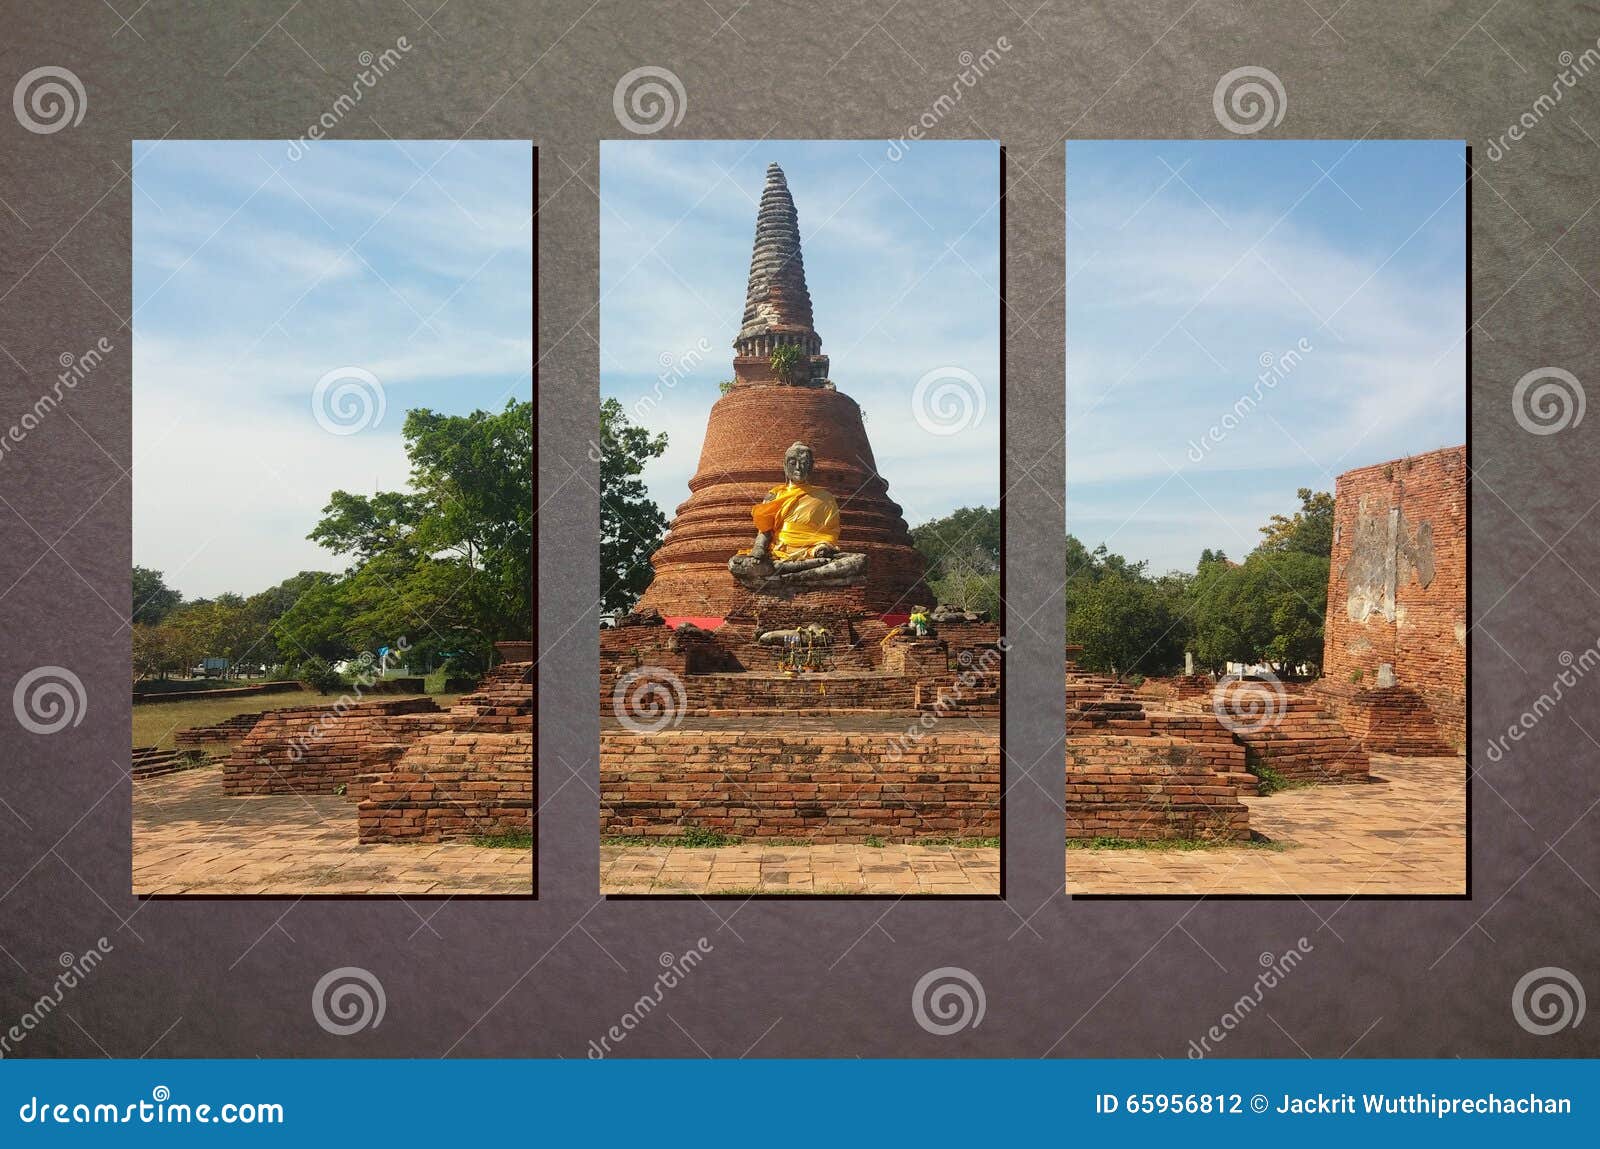 The Collage Photo of Ruin Ayutthaya Brick Temple in Sunny Day on Abstract  Gray Wall Background Made by Photoshop, Vintage Style Stock Photo - Image  of collection, collage: 65956812